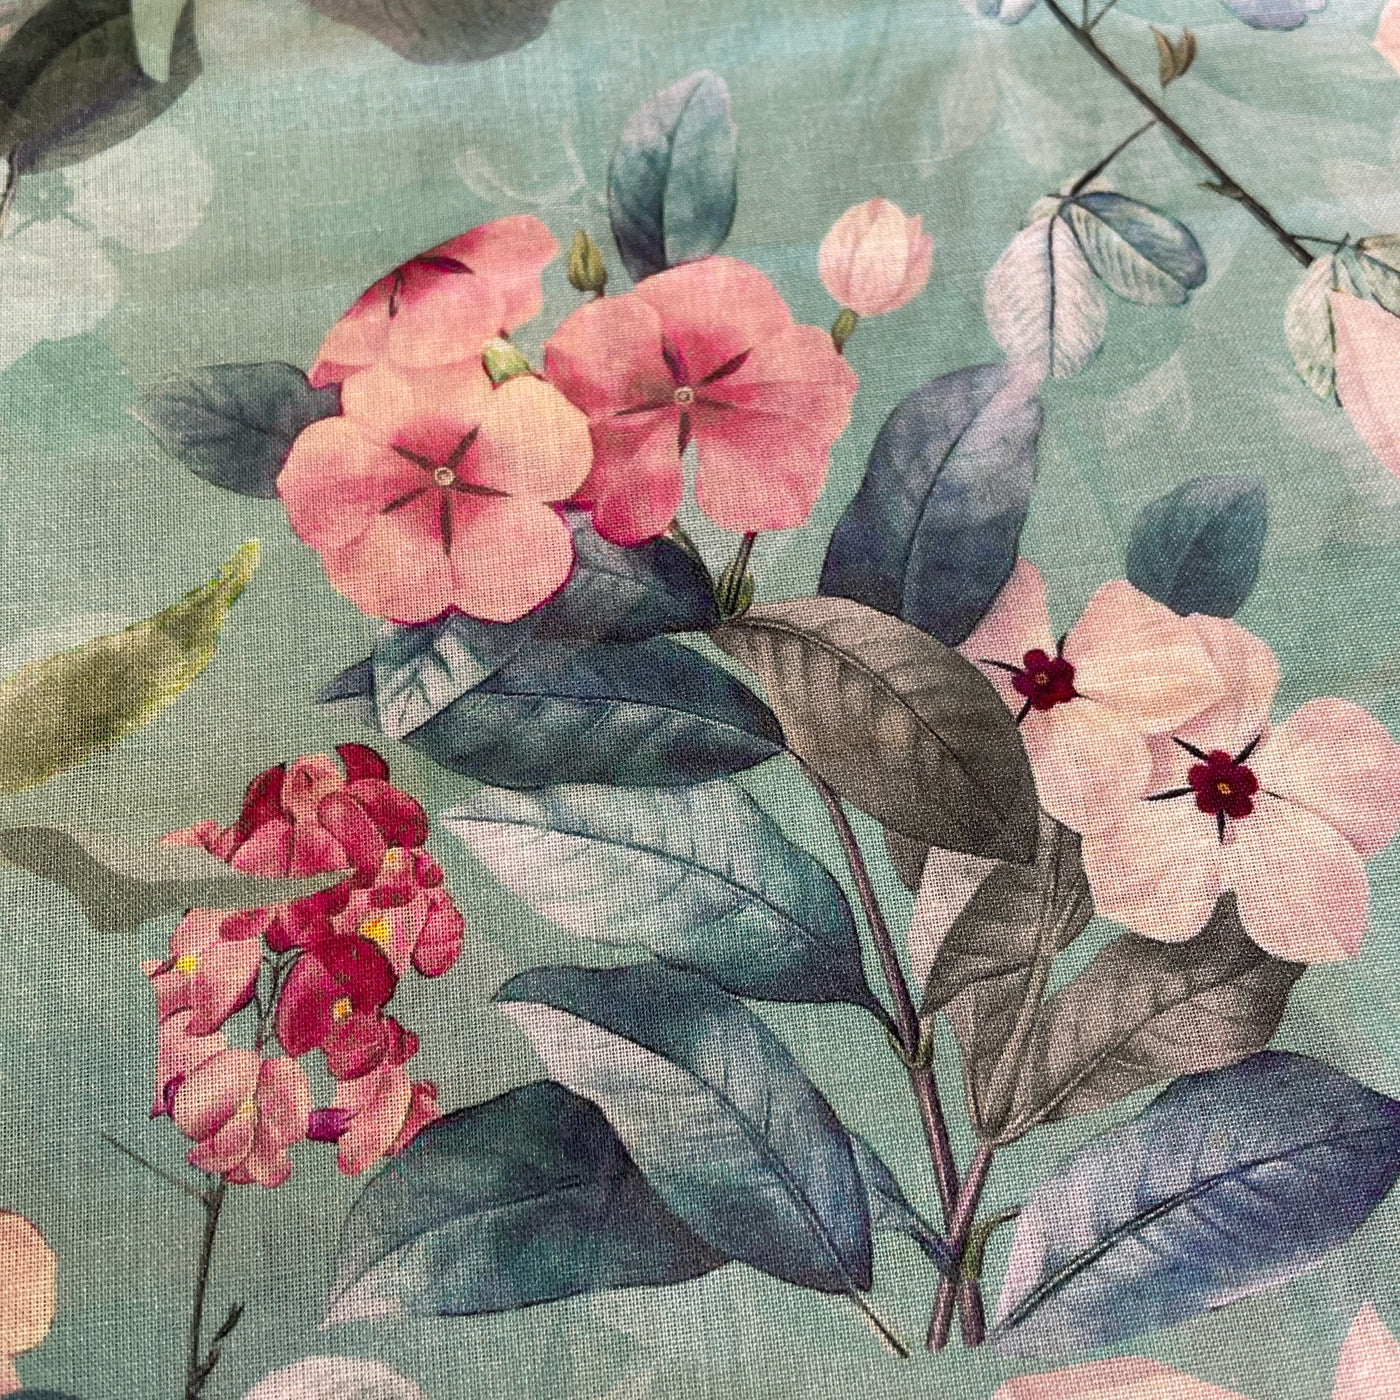 Luxurious aqua green Digital Cotton Lawn floral prints are lightweight and soft with beautiful drape – perfect for dresses, blouses, skirts and crafts. At a width of 135cm / 53" and a weight of 75gsm